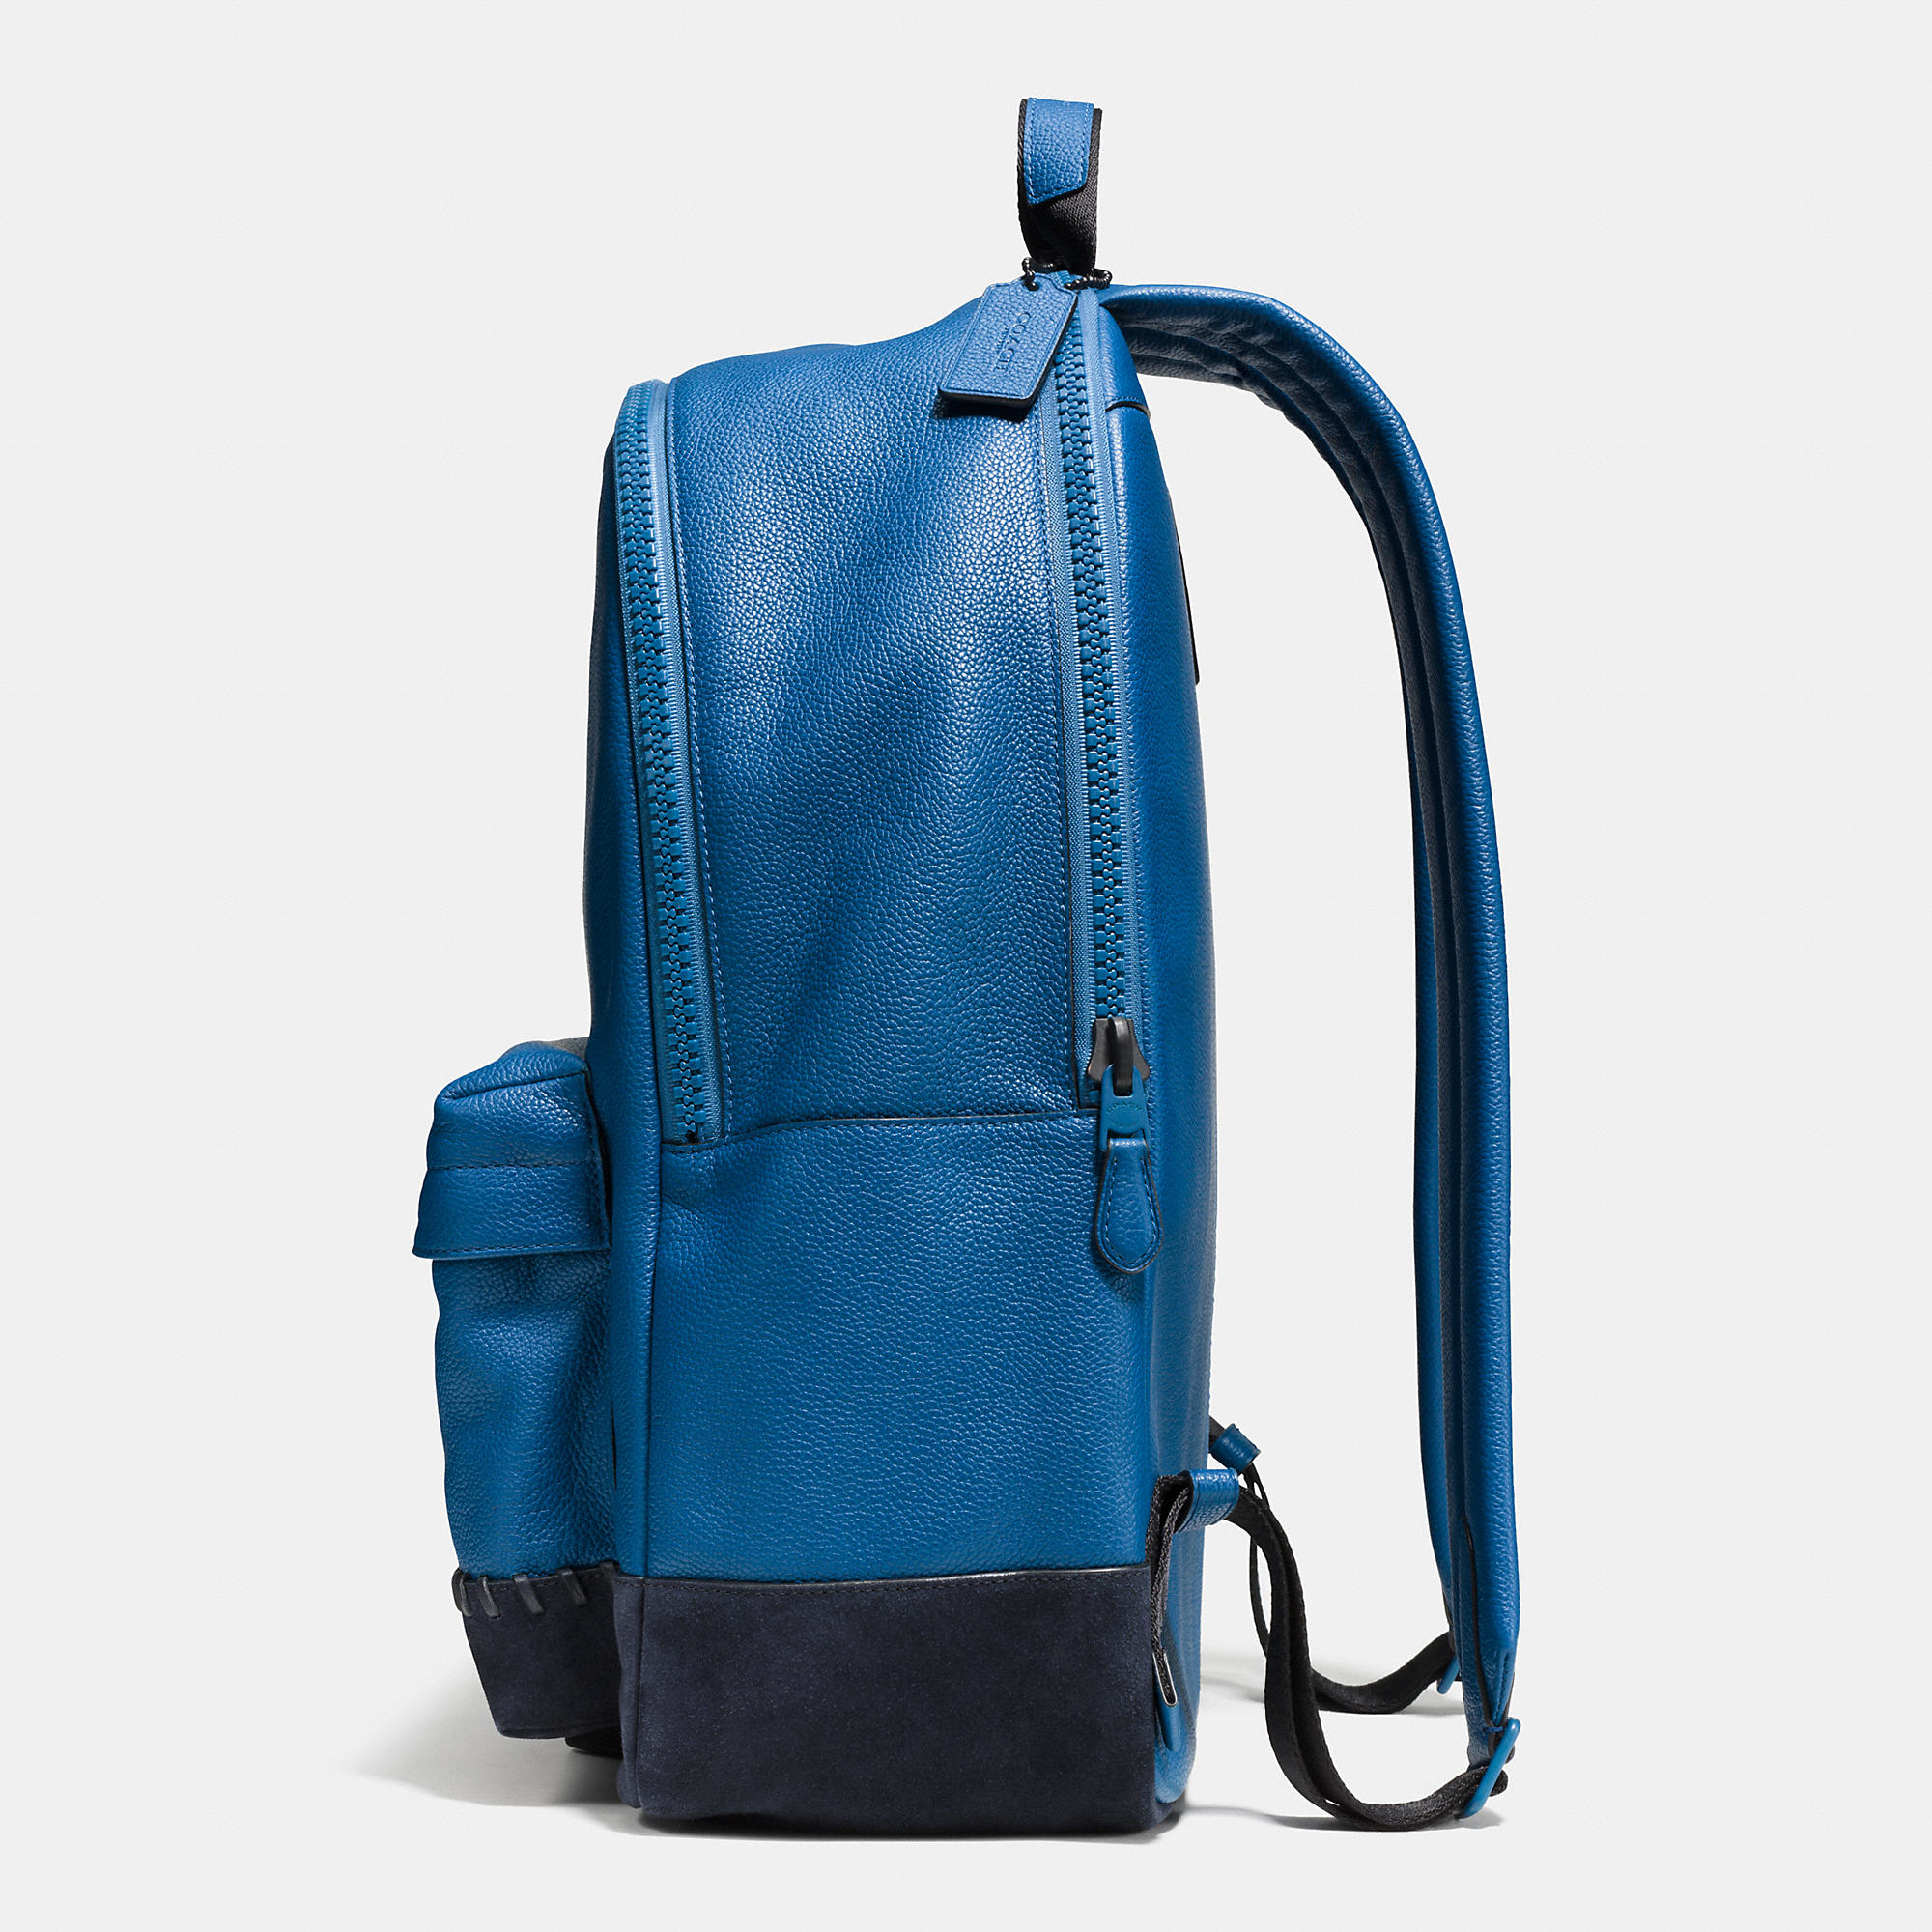 COACH Modern Varsity Campus Backpack In Pebble Leather in Denim ...